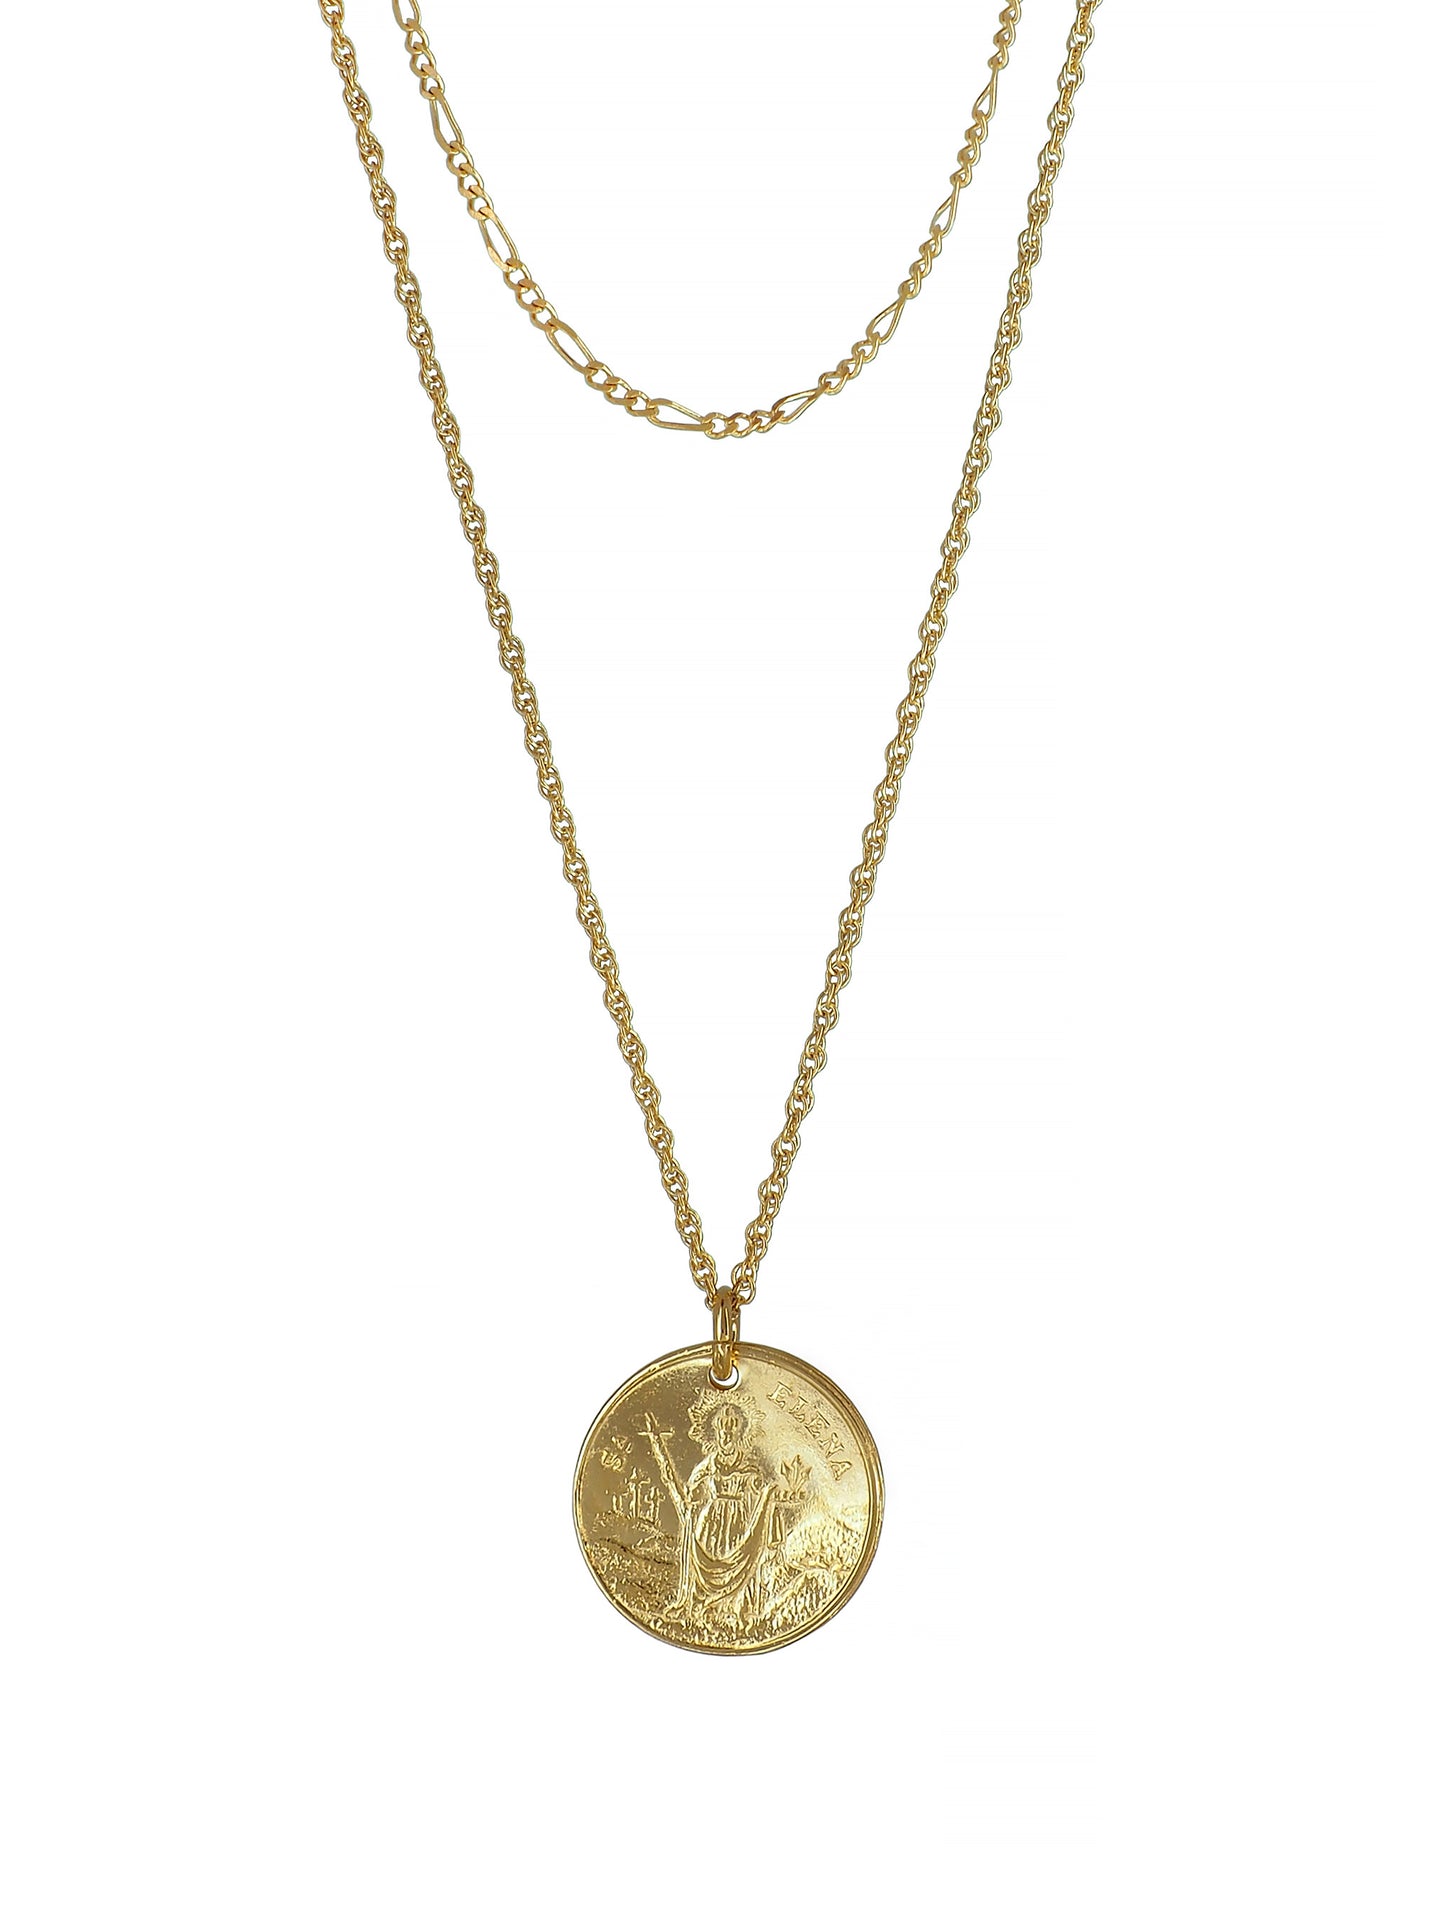 Gorgeous St Elena and her son Necklace, gold plated